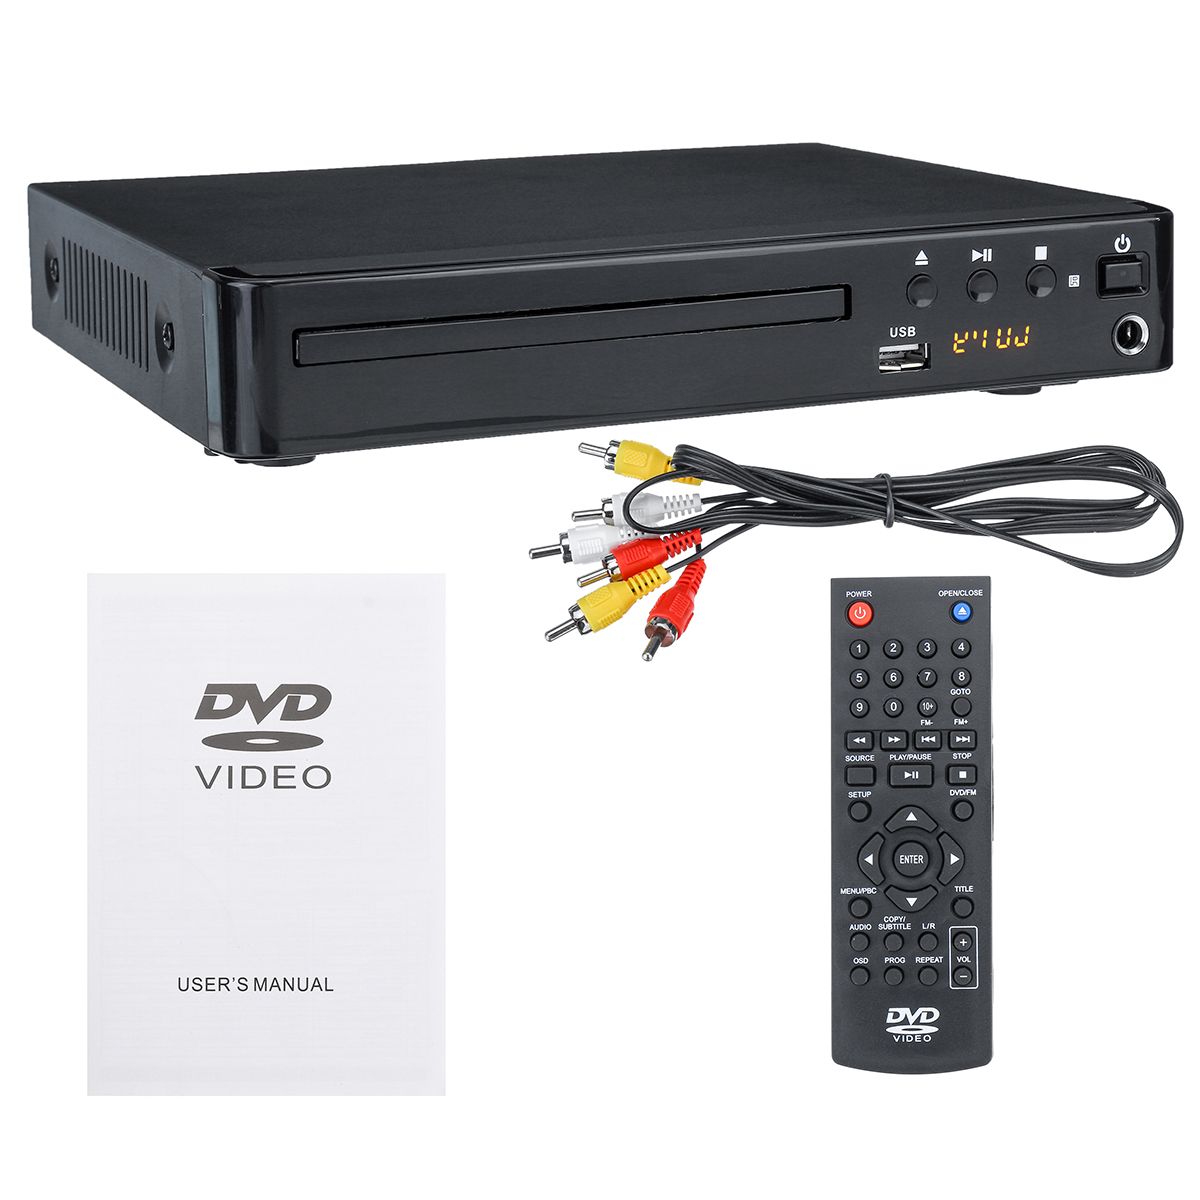 1080P-Full-HD-LCD-DVD-Player-Compact-6-Region-Stereo-Video-MP4-MP3-CD-USB-Remote-1699901